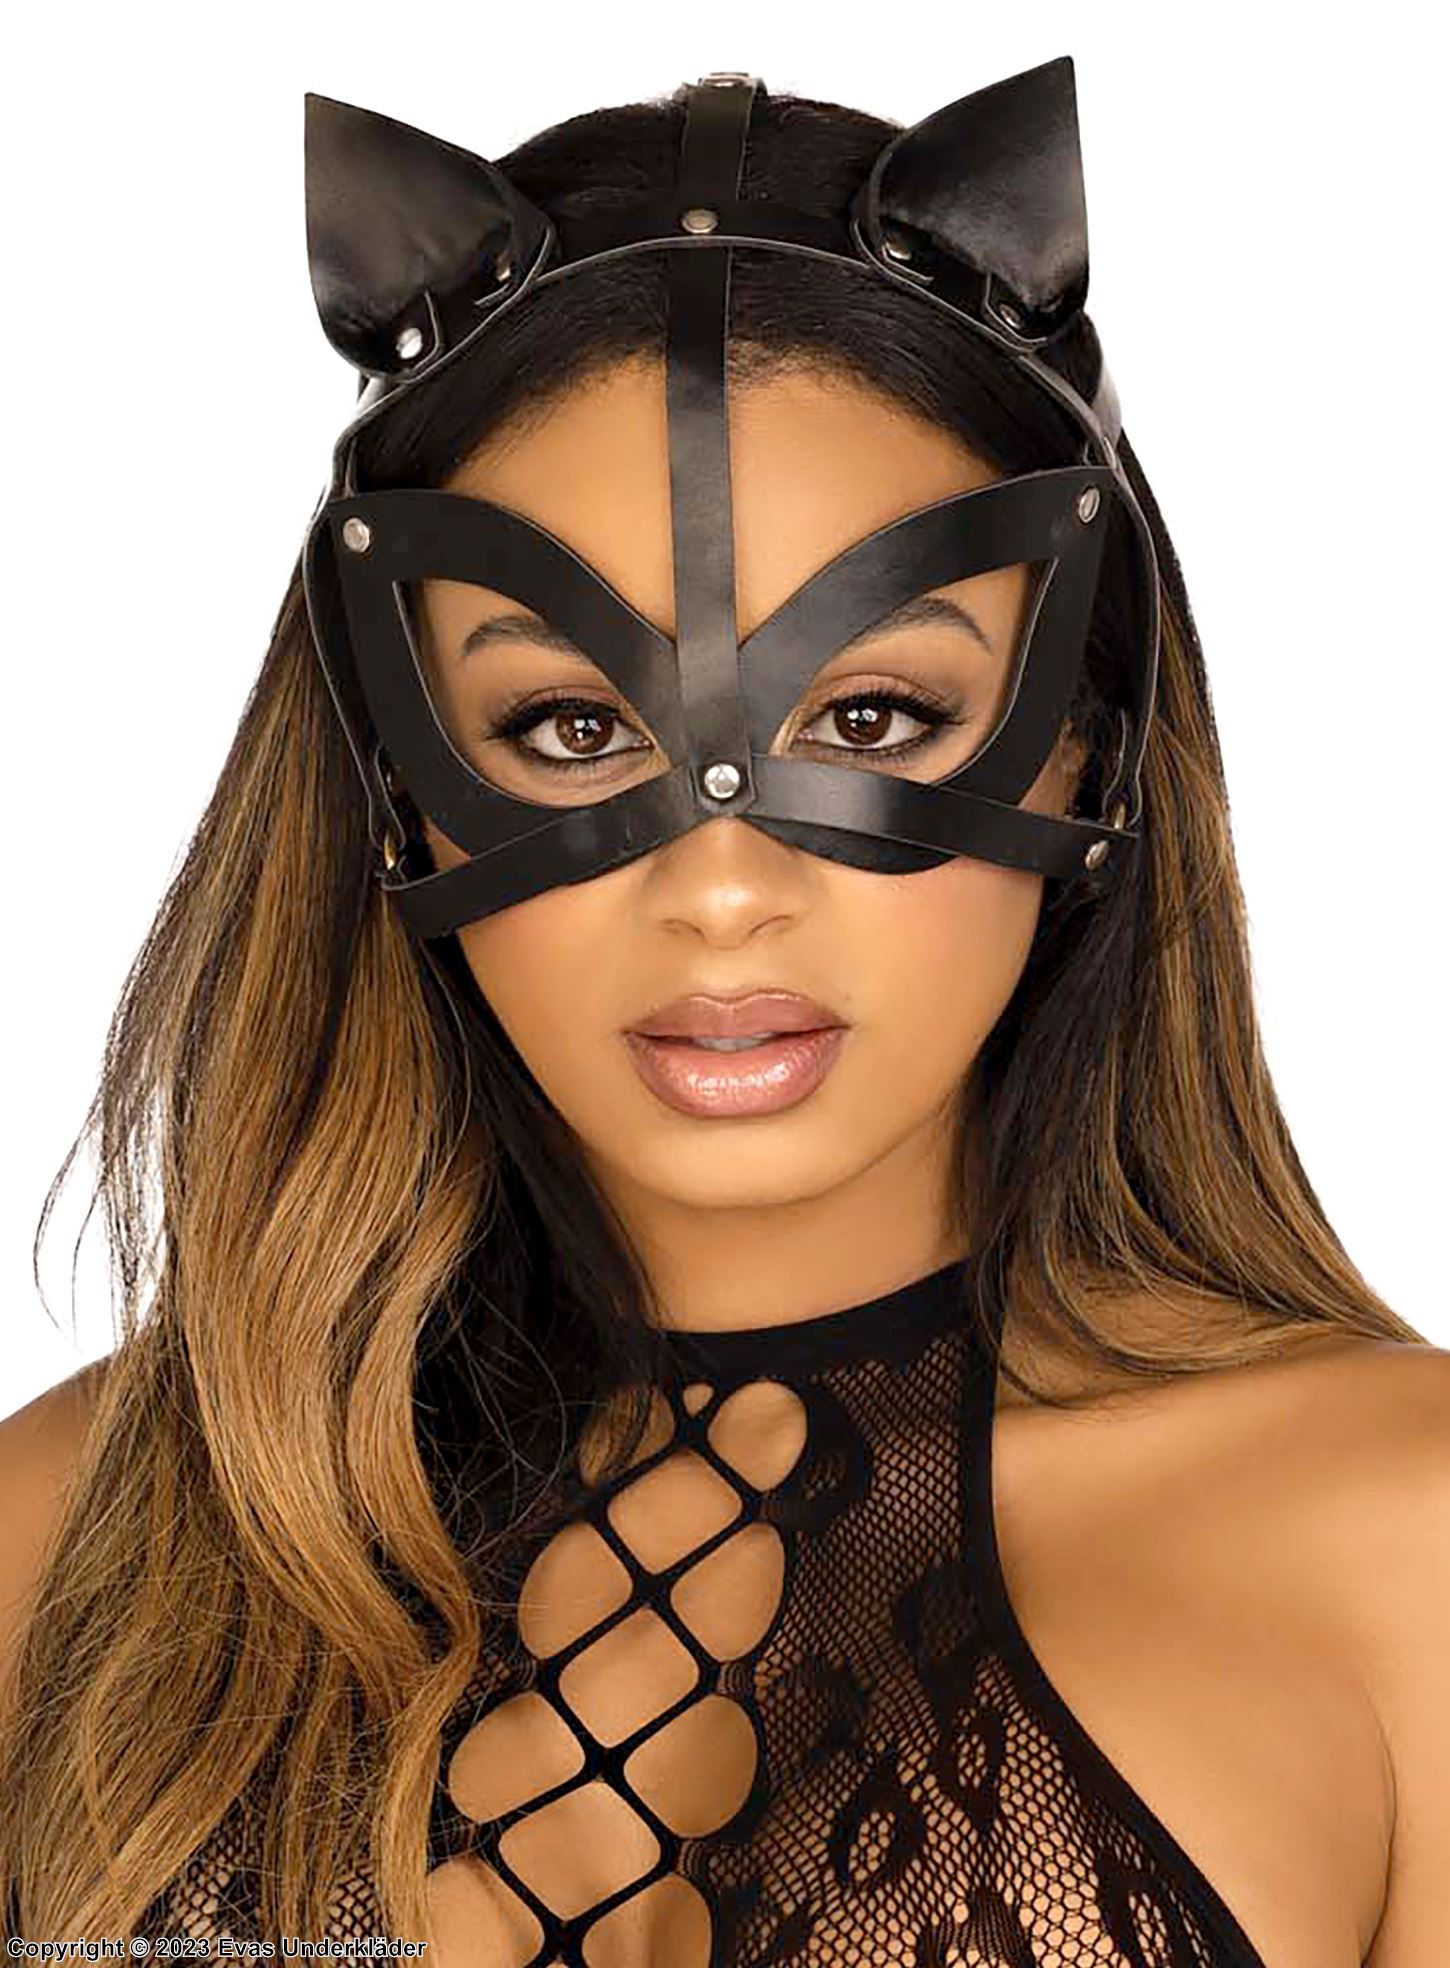 Cat (woman), costume mask, faux leather, studs, ears